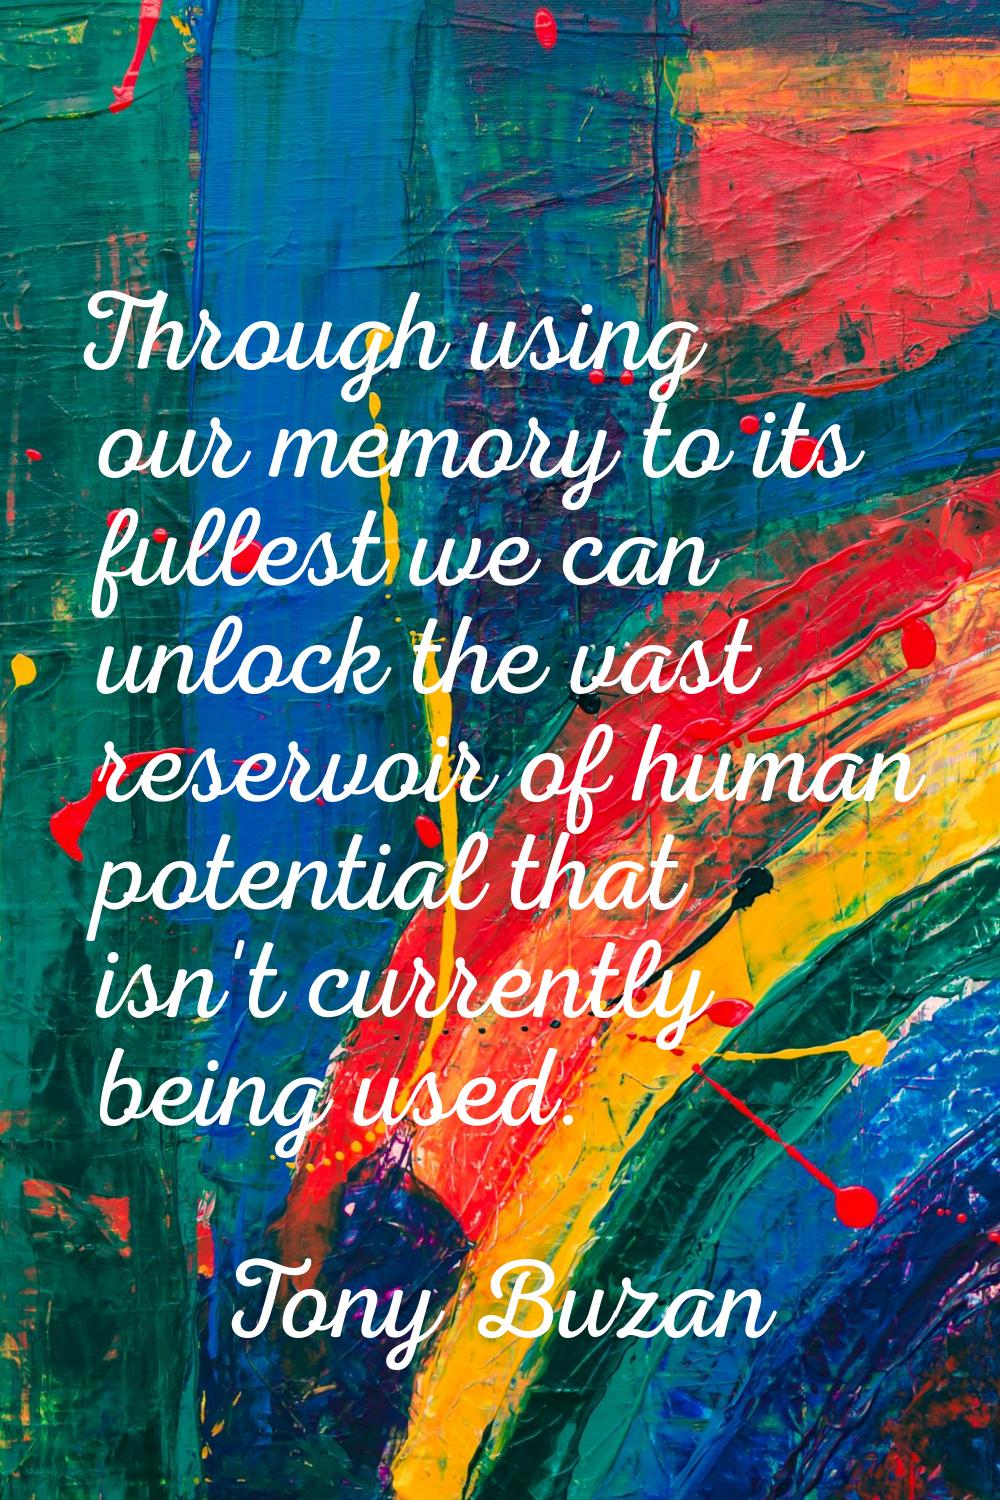 Through using our memory to its fullest we can unlock the vast reservoir of human potential that is